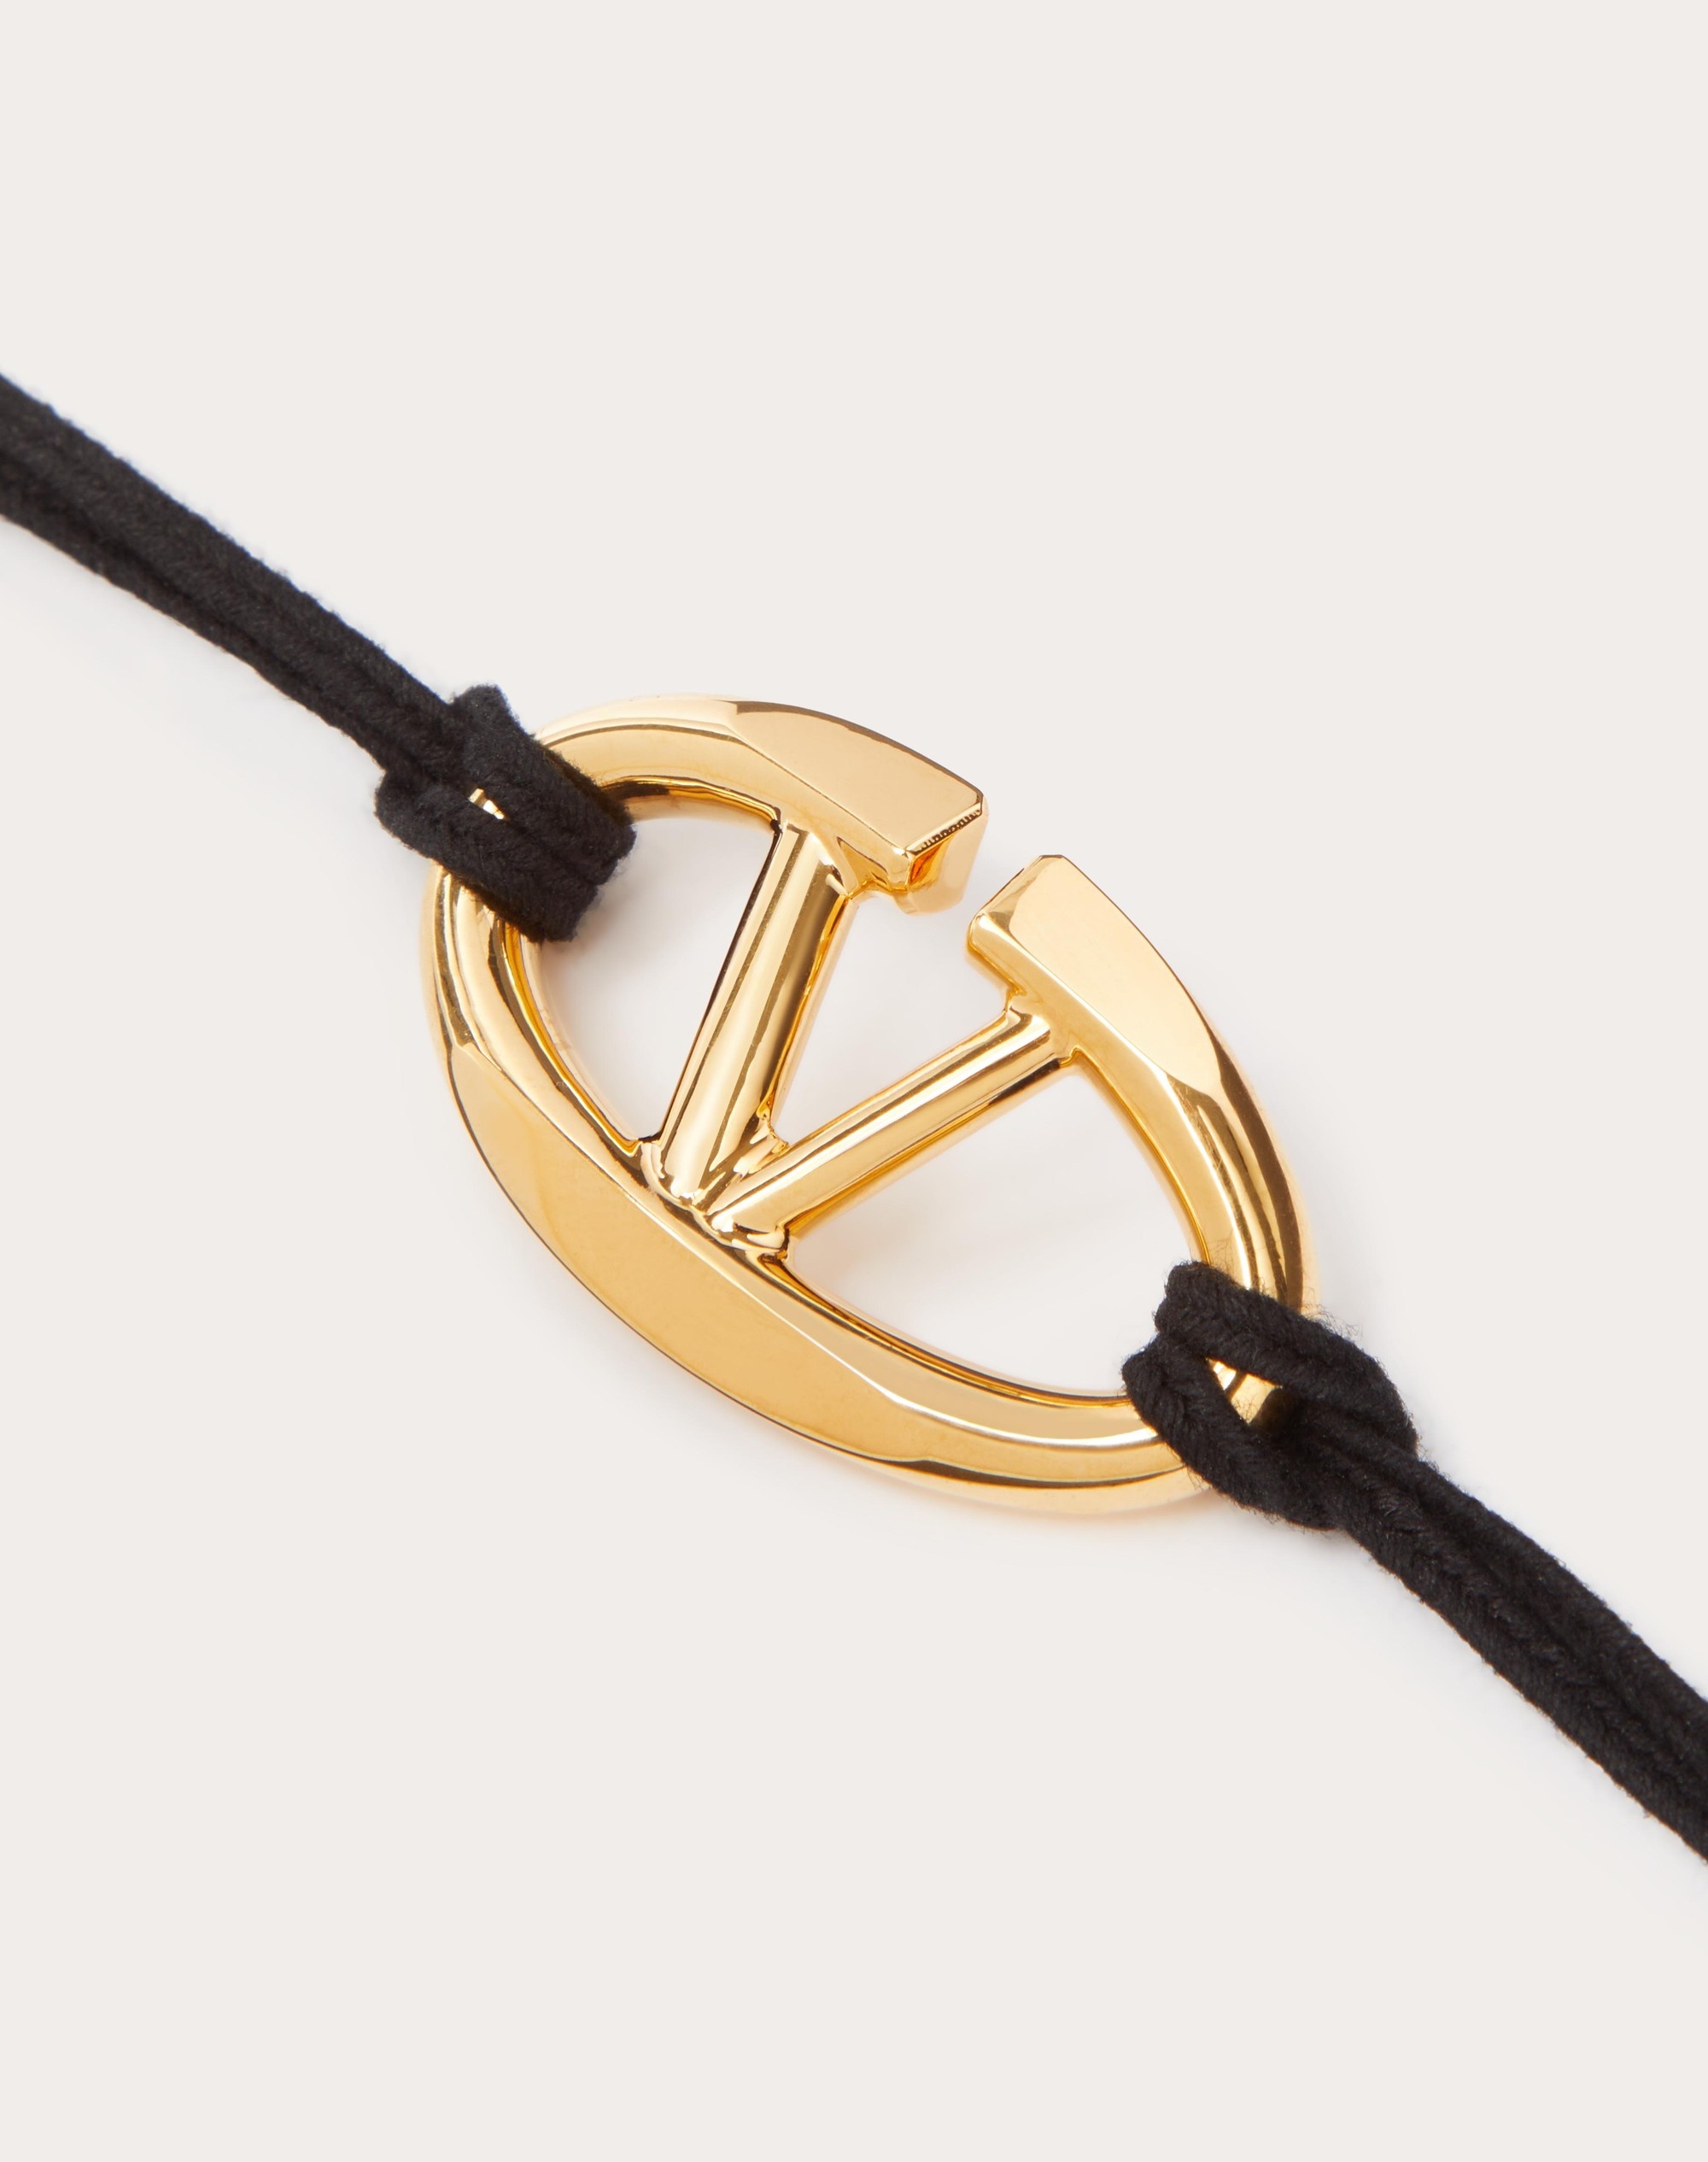 THE BOLD EDITION VLOGO ROPE AND METAL BRACELET - 2